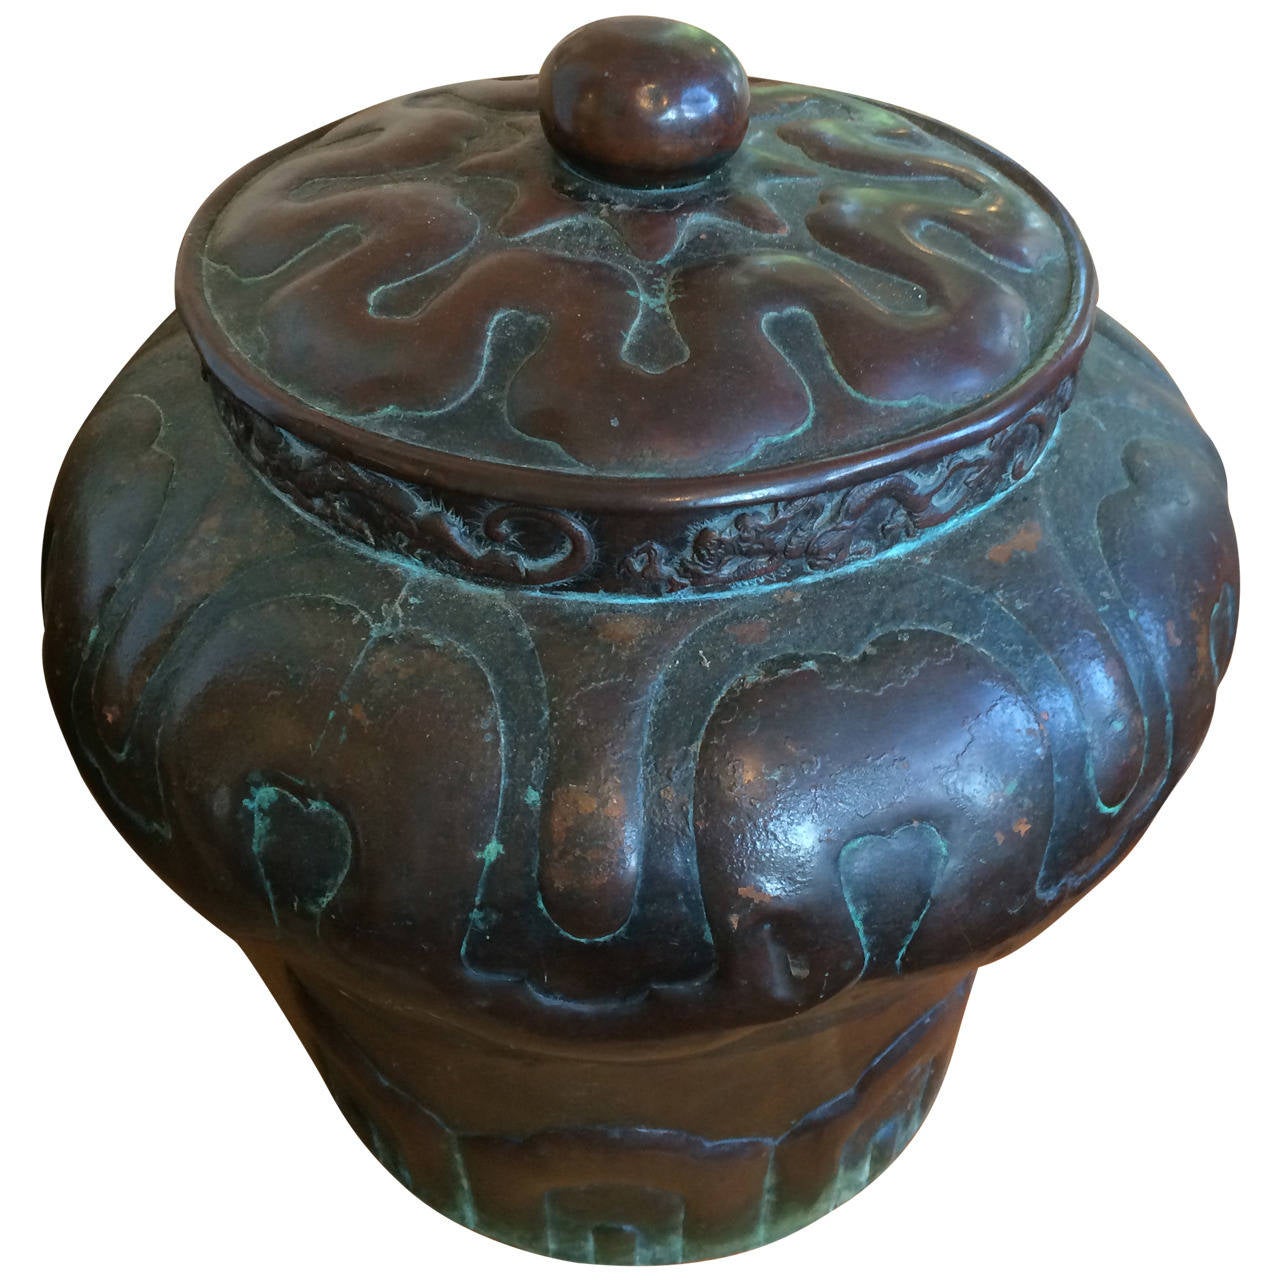 Early 20th century sculptural Chinese copper lidded jar with dragon and lotus motif.